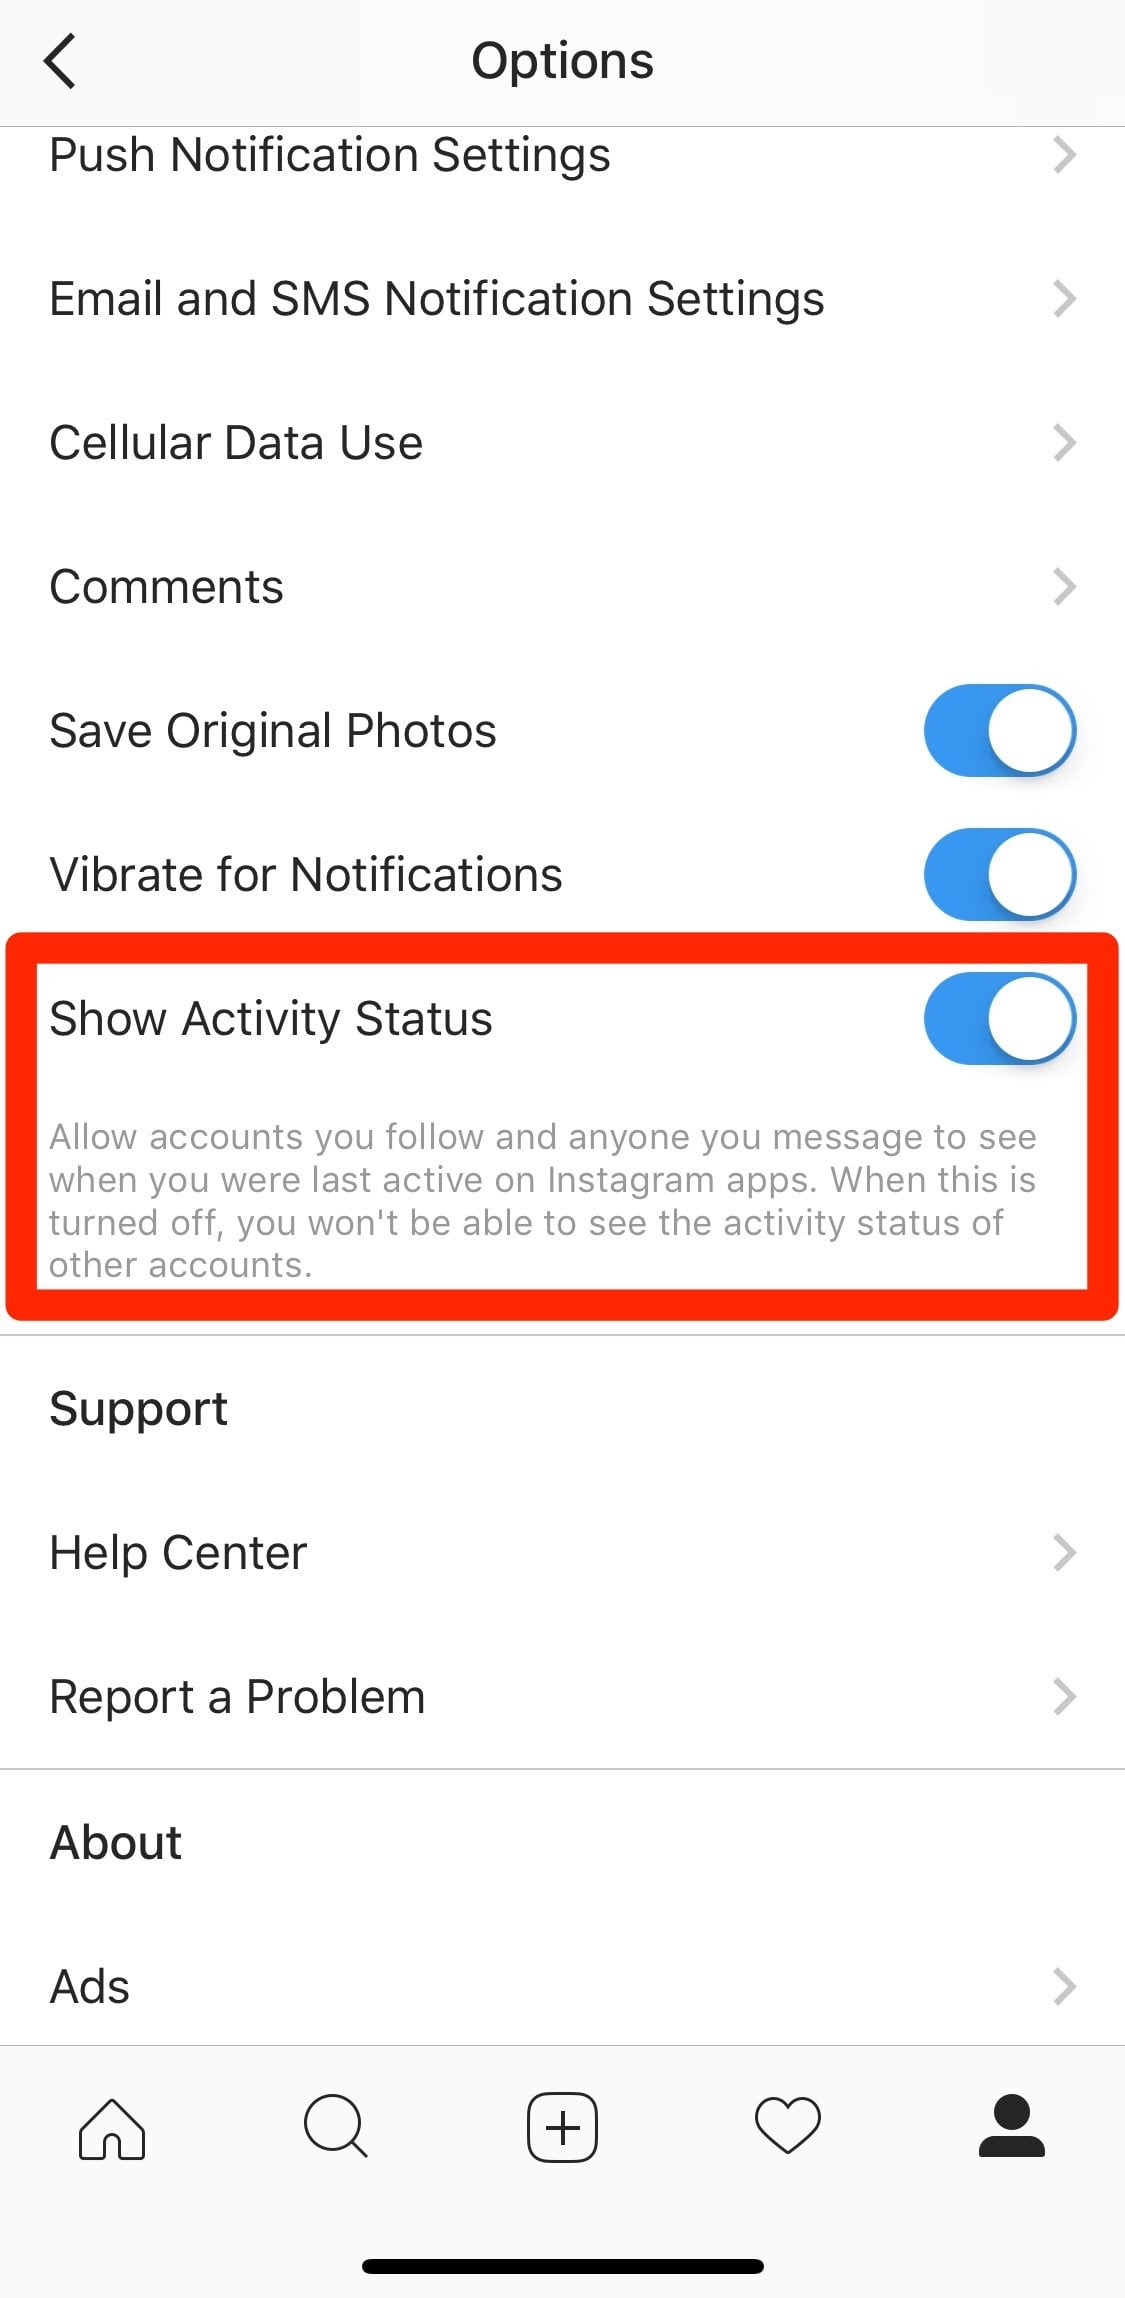 How to turn off the new feature on Instagram?